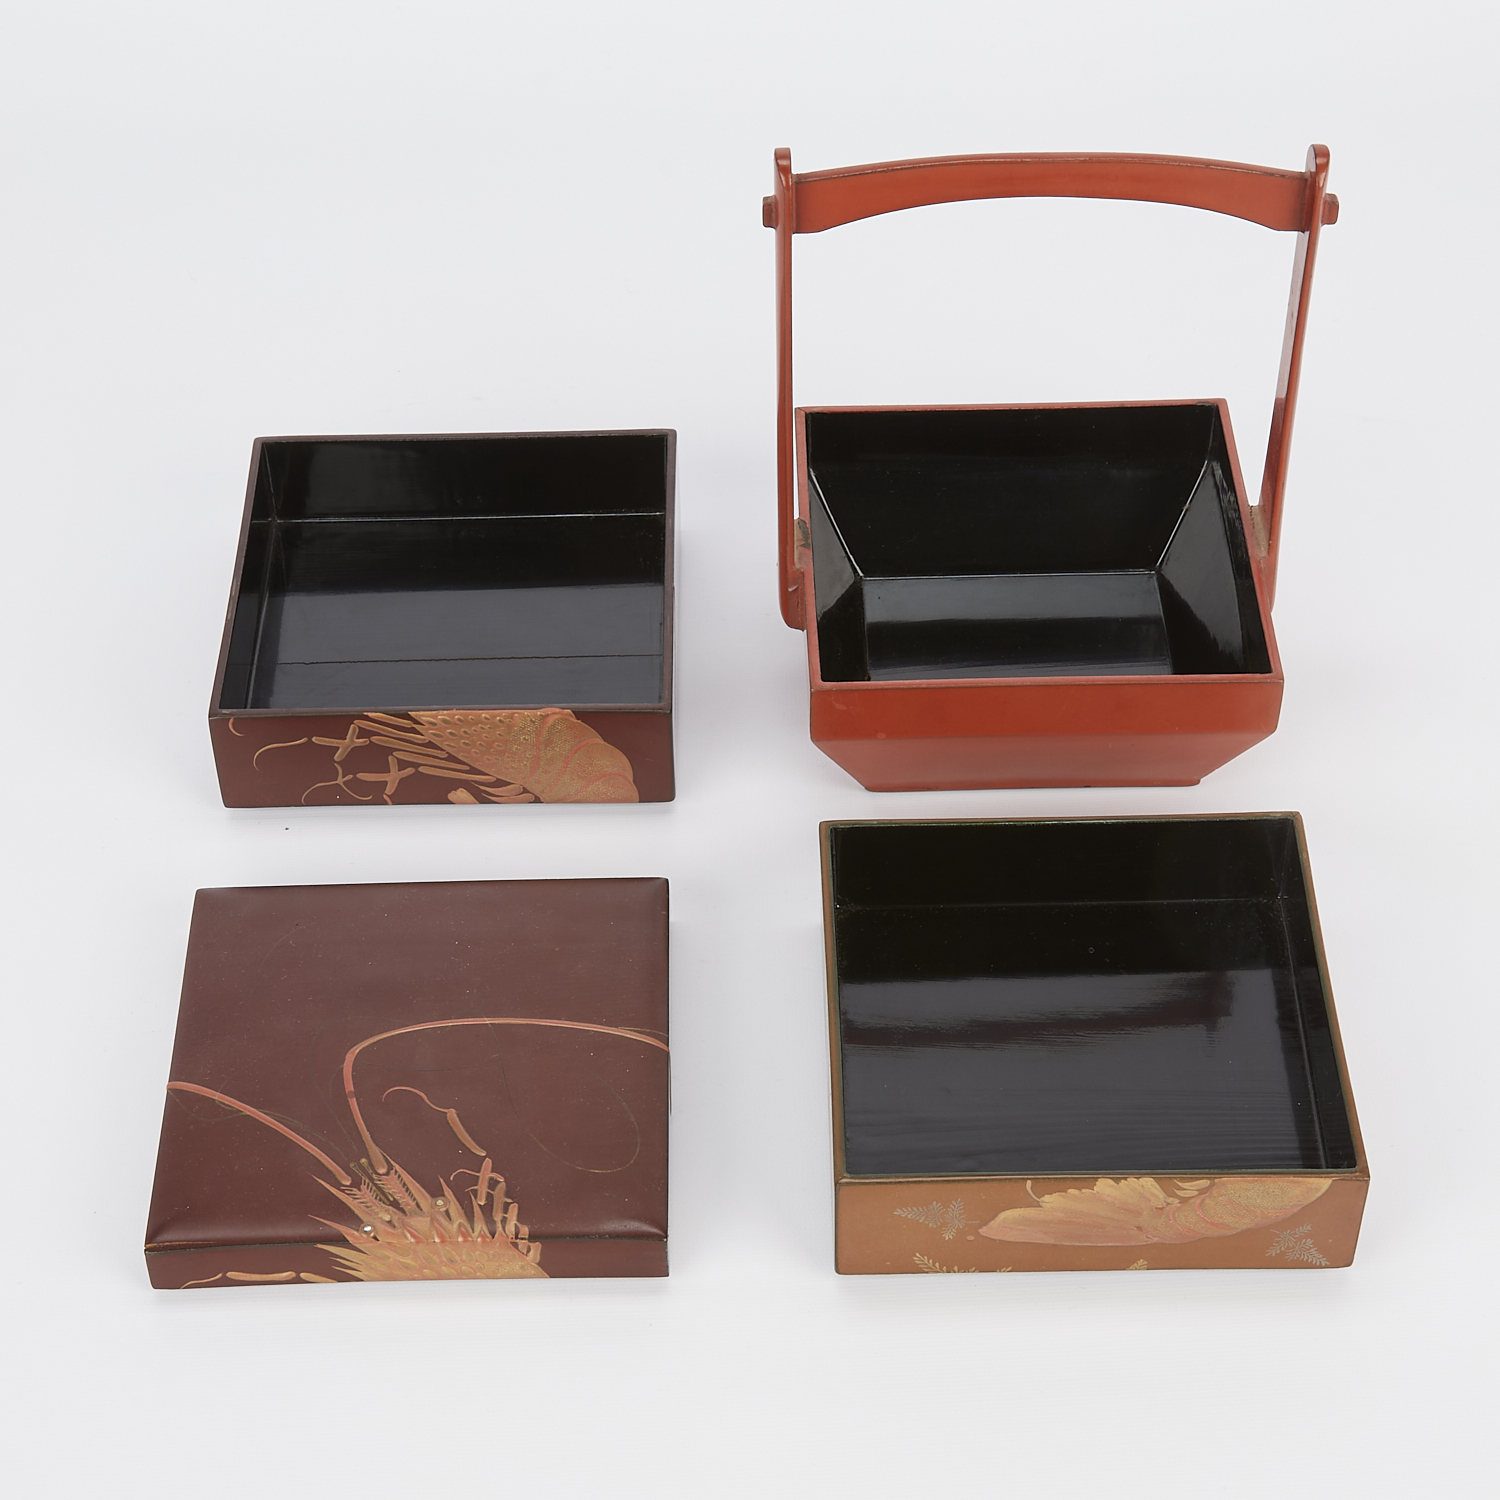 2 Japanese Lacquerware Boxes w/ Crustaceans - Image 14 of 17